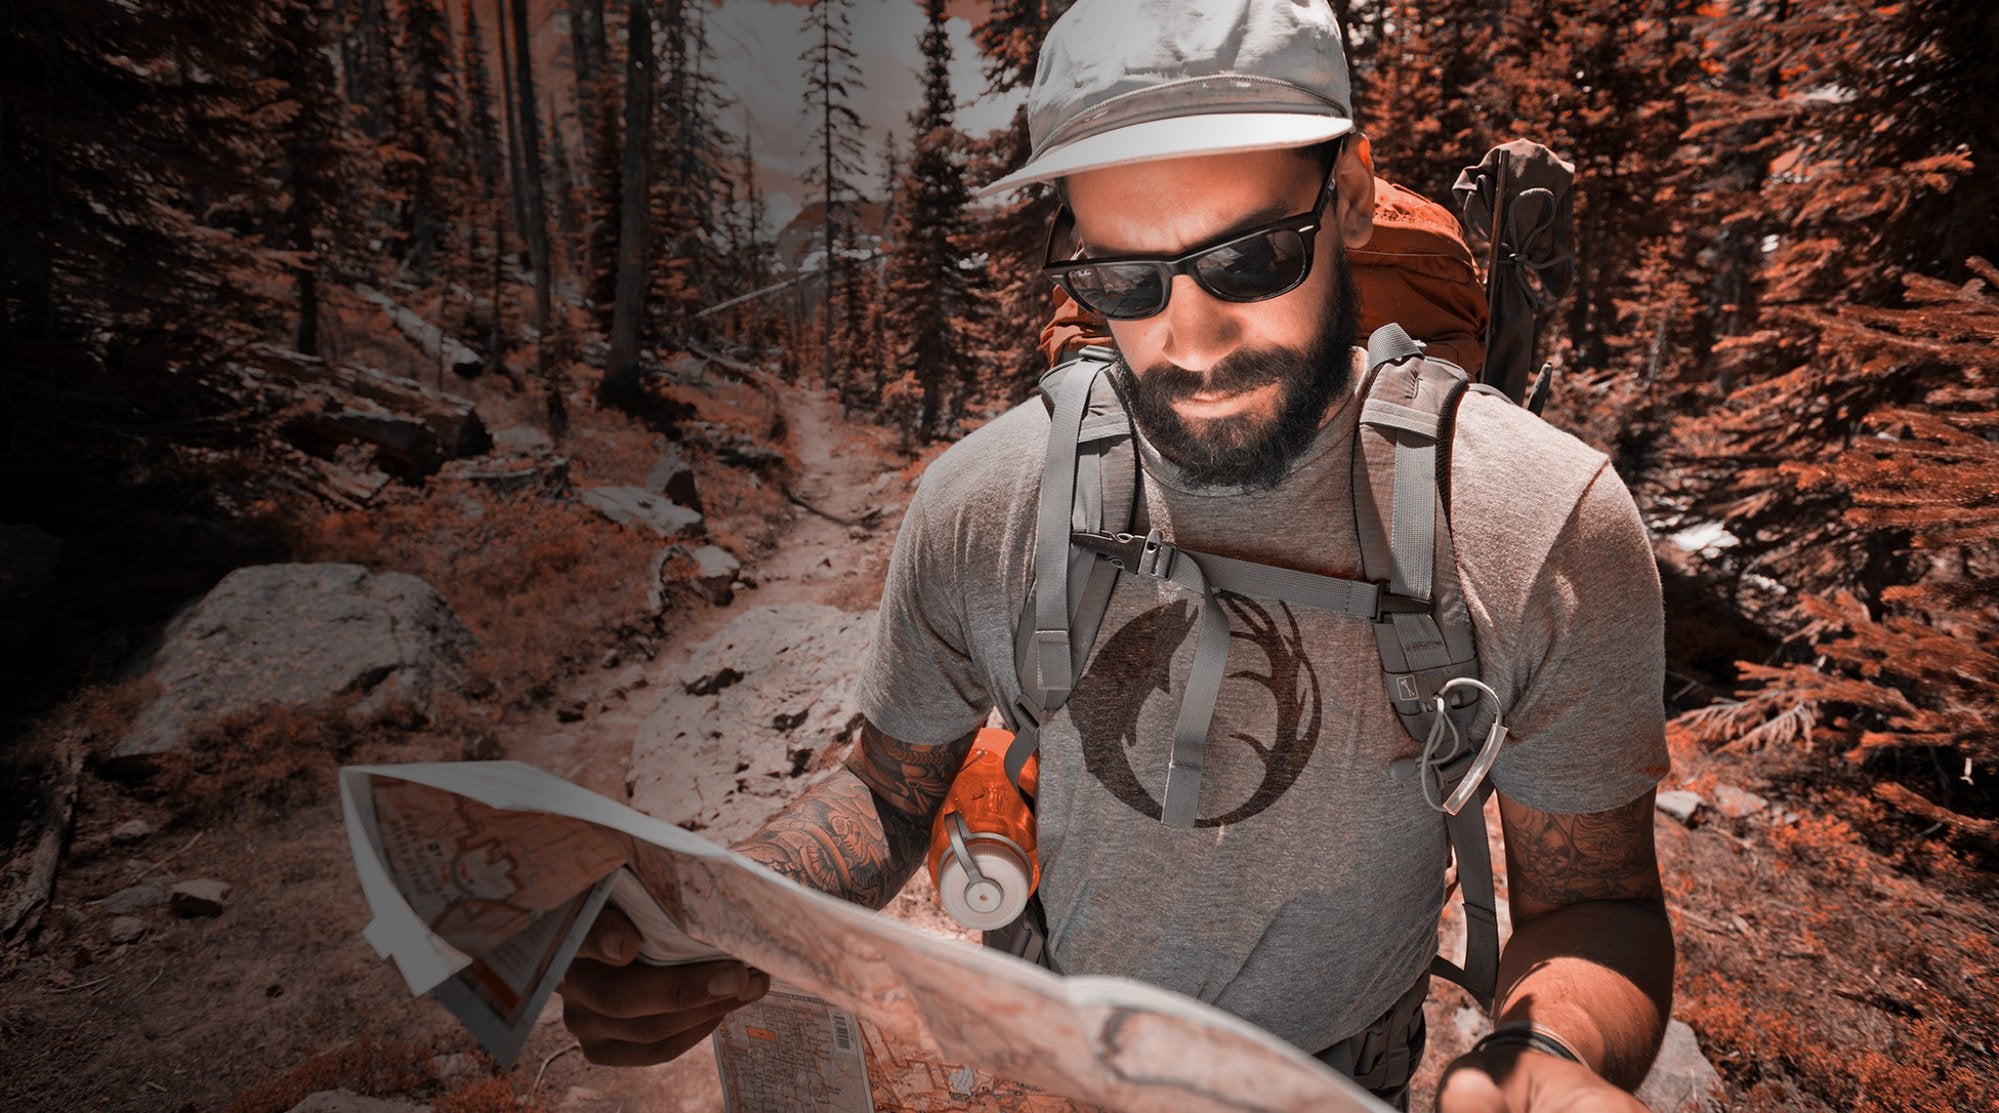 The American Outdoorsman, New Outdoor Clothing For Those "Born to Roam"